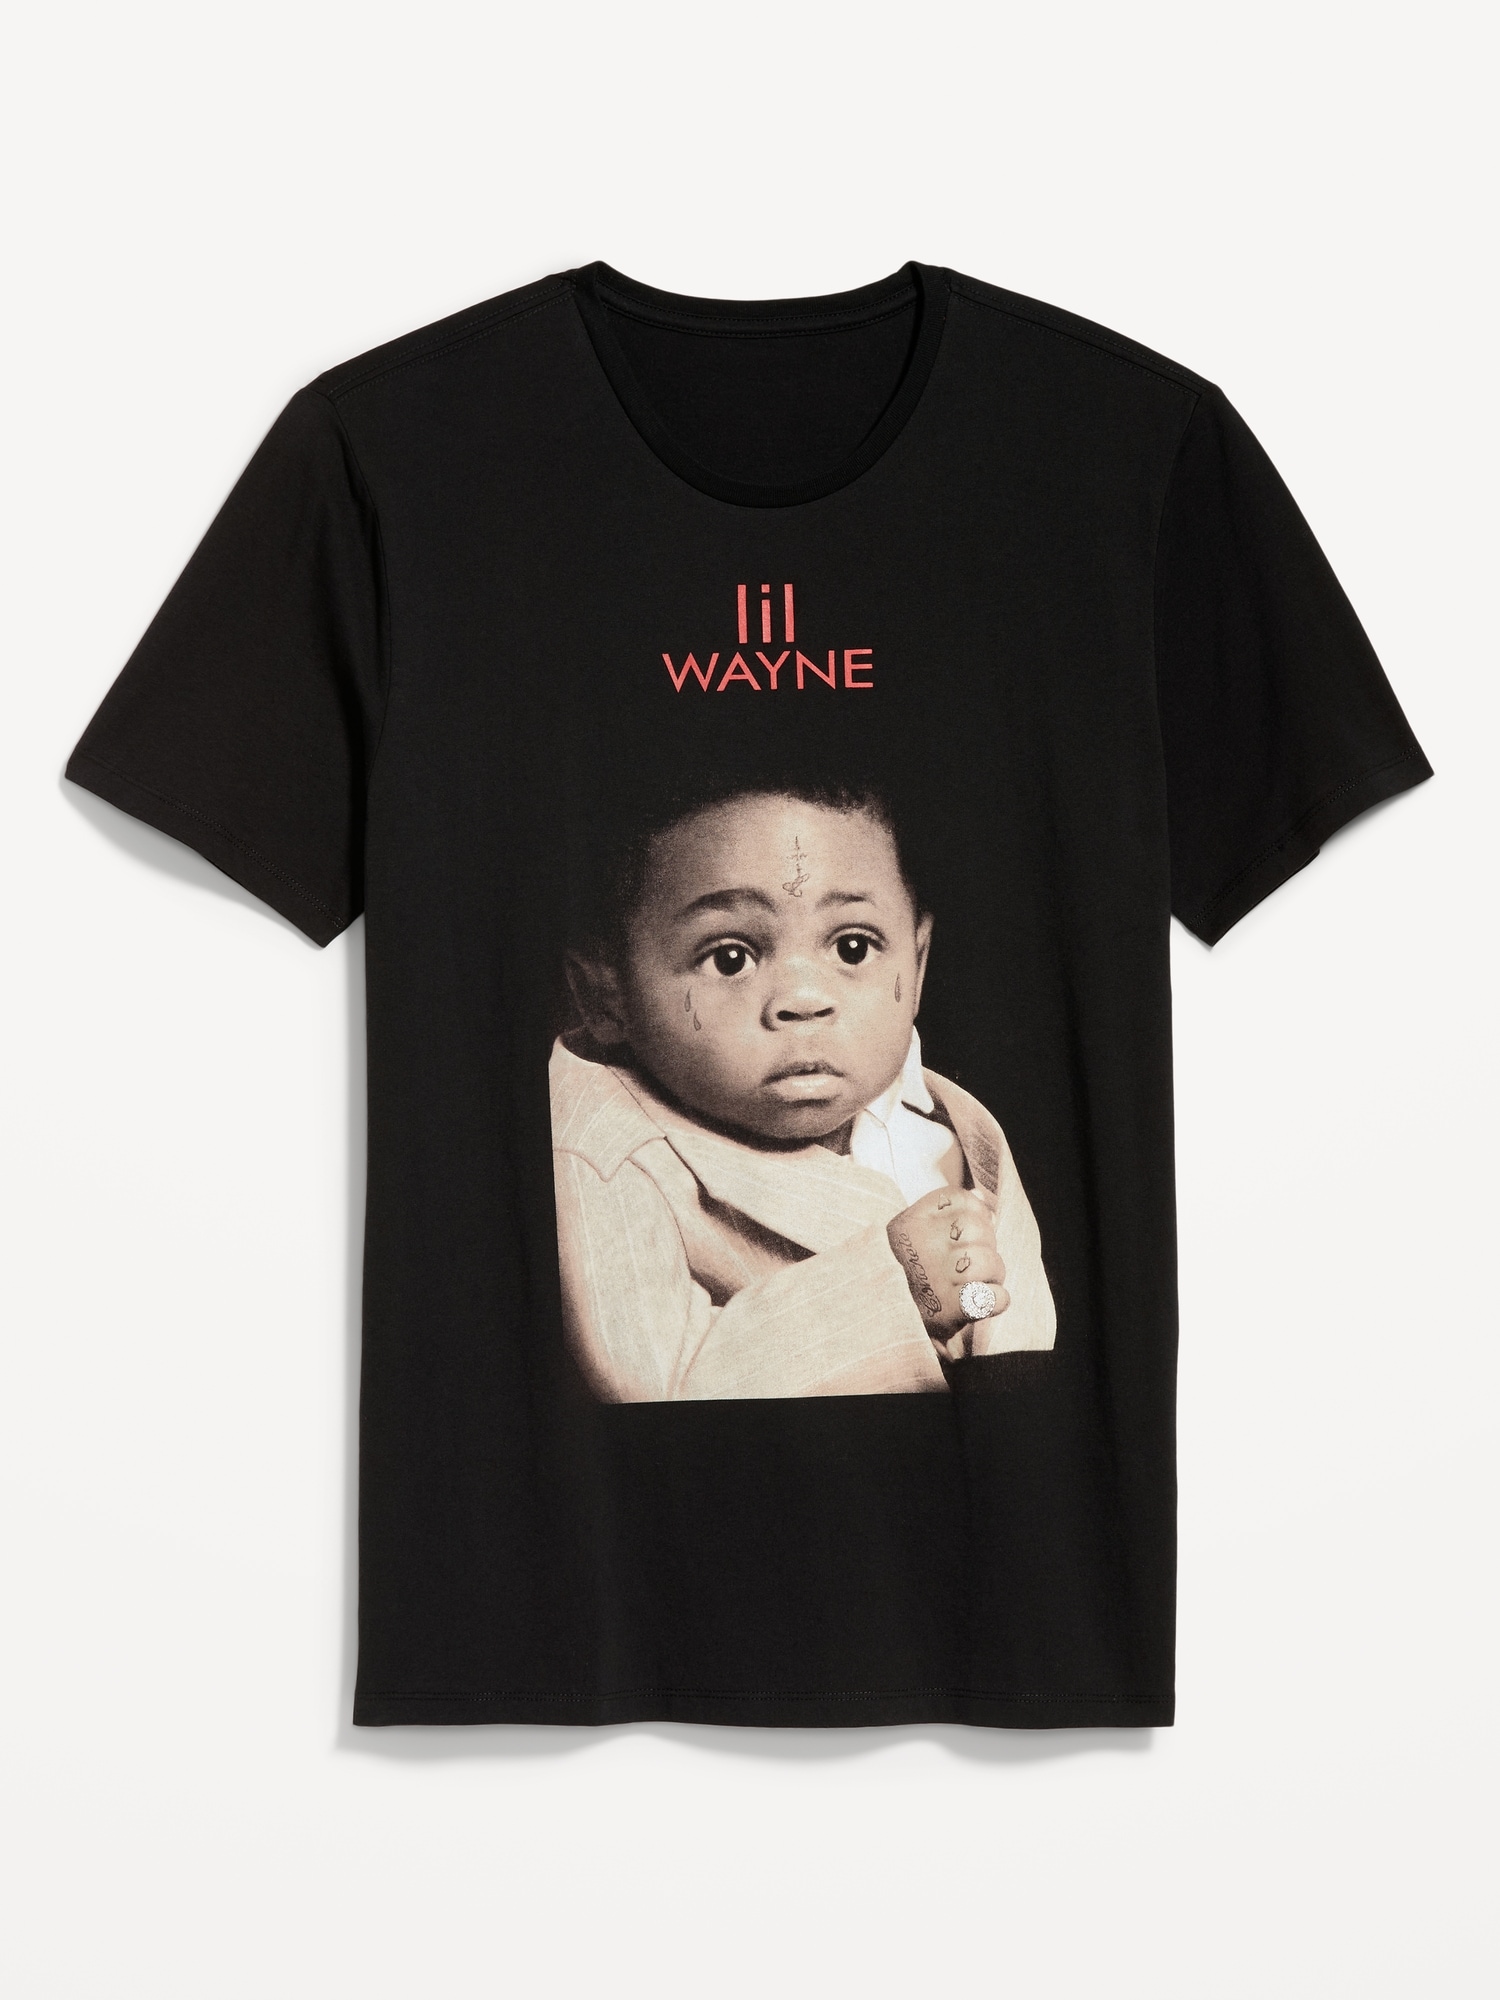 Lil Wayne™ Gender-Neutral T-Shirt for Adults